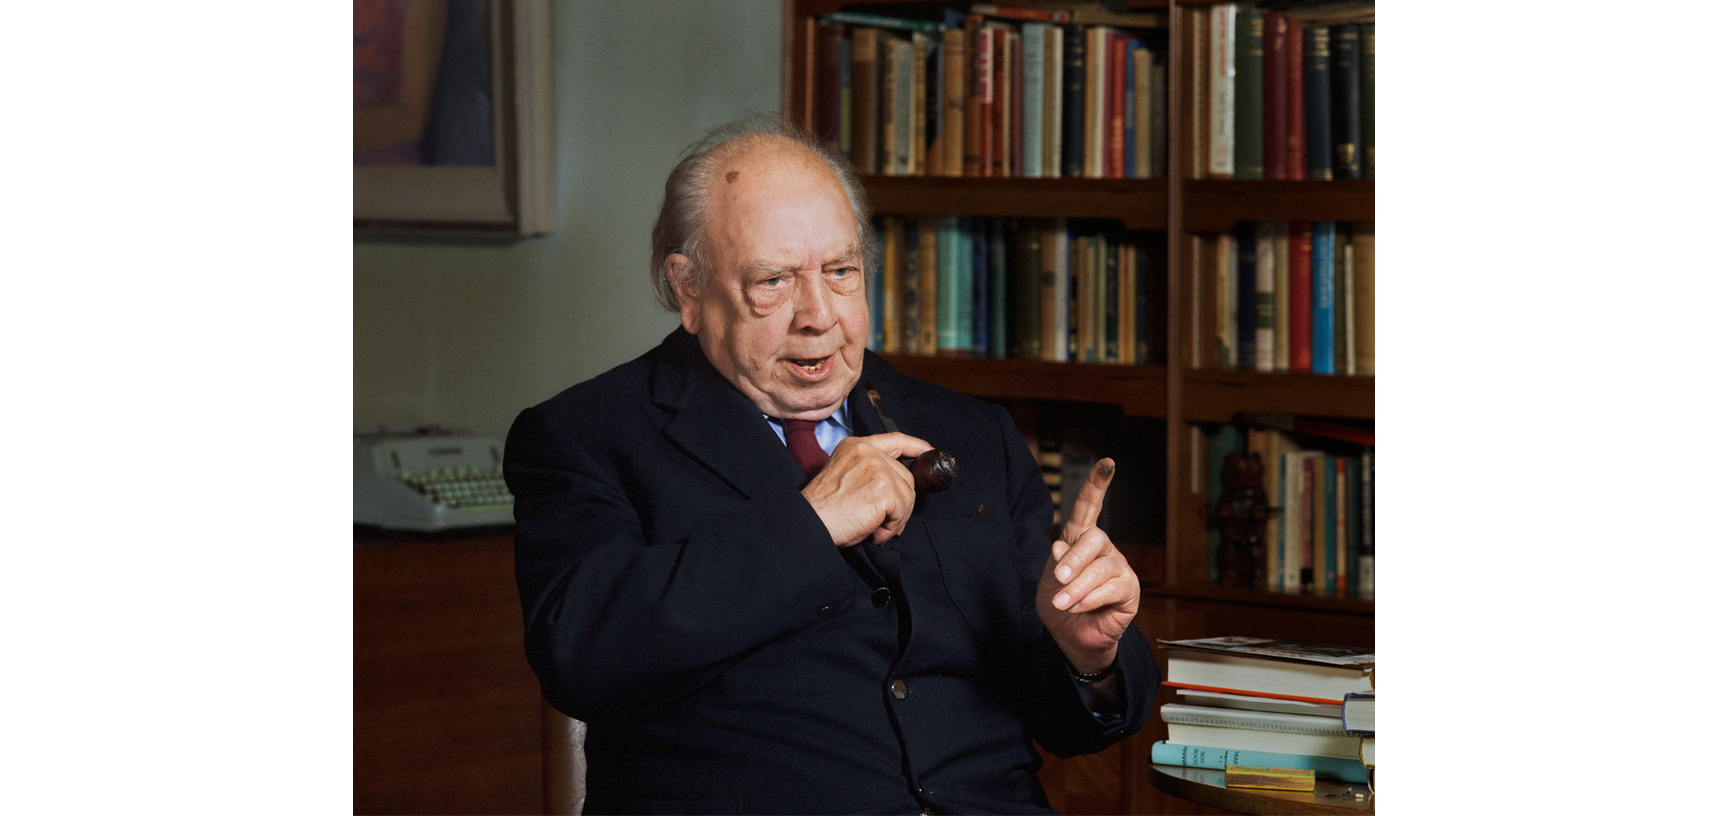 Portrait of JB Preistley - an older white male dressed in a navy blue suit, light blue shirt and red tie, sitting in a chair with bookshelves in the background diaganol to the camera